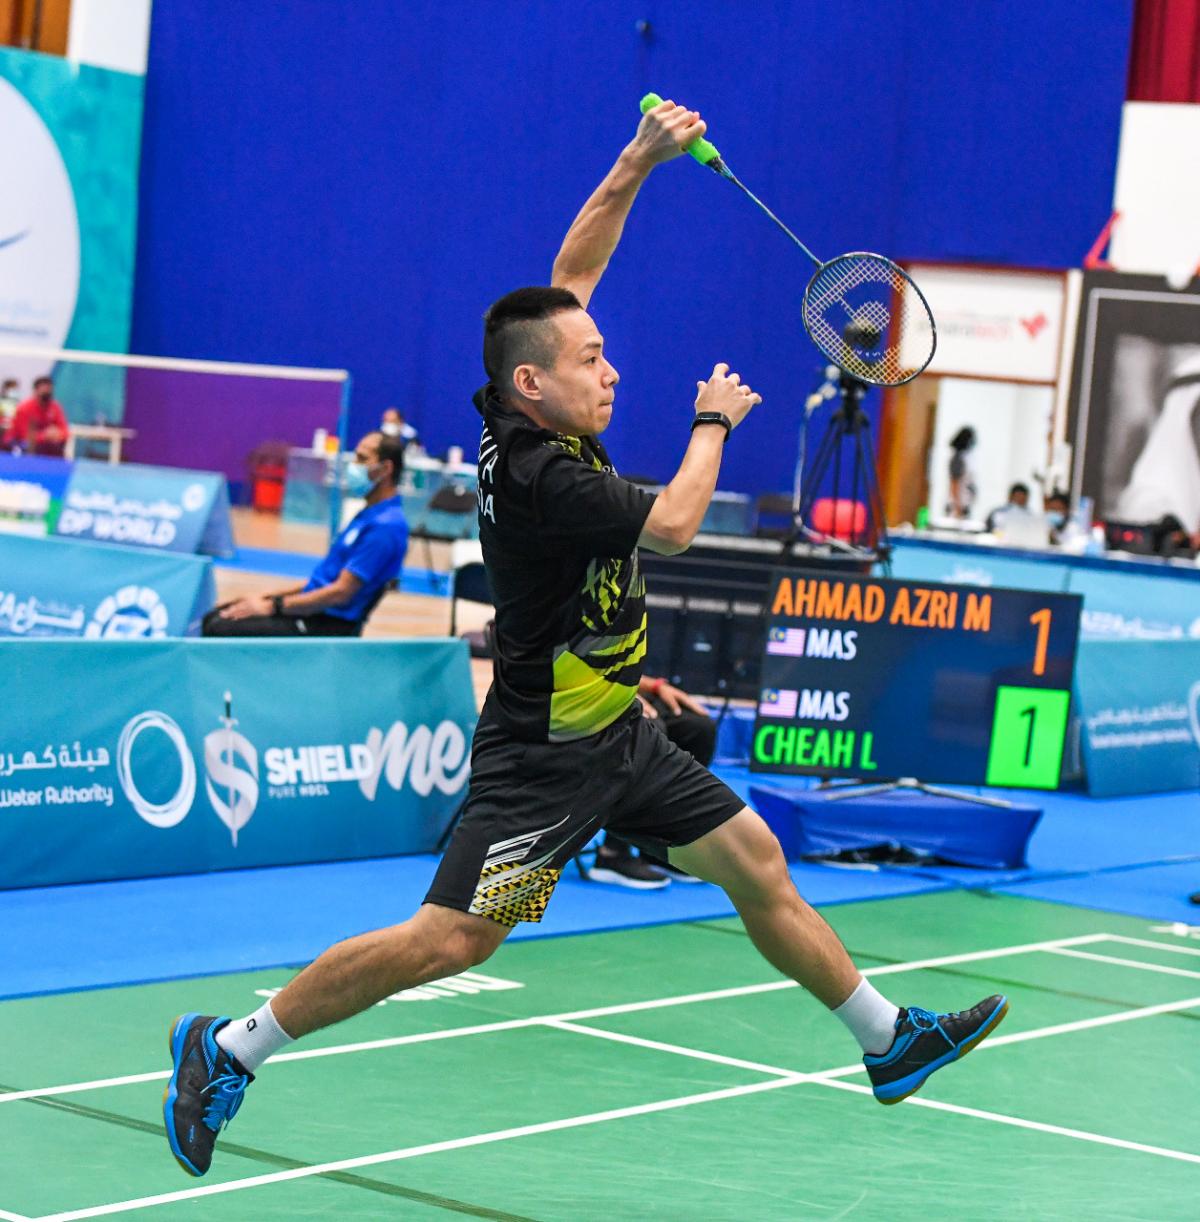 Malaysia's Cheah Liek Hou jumps in the air playing badminton